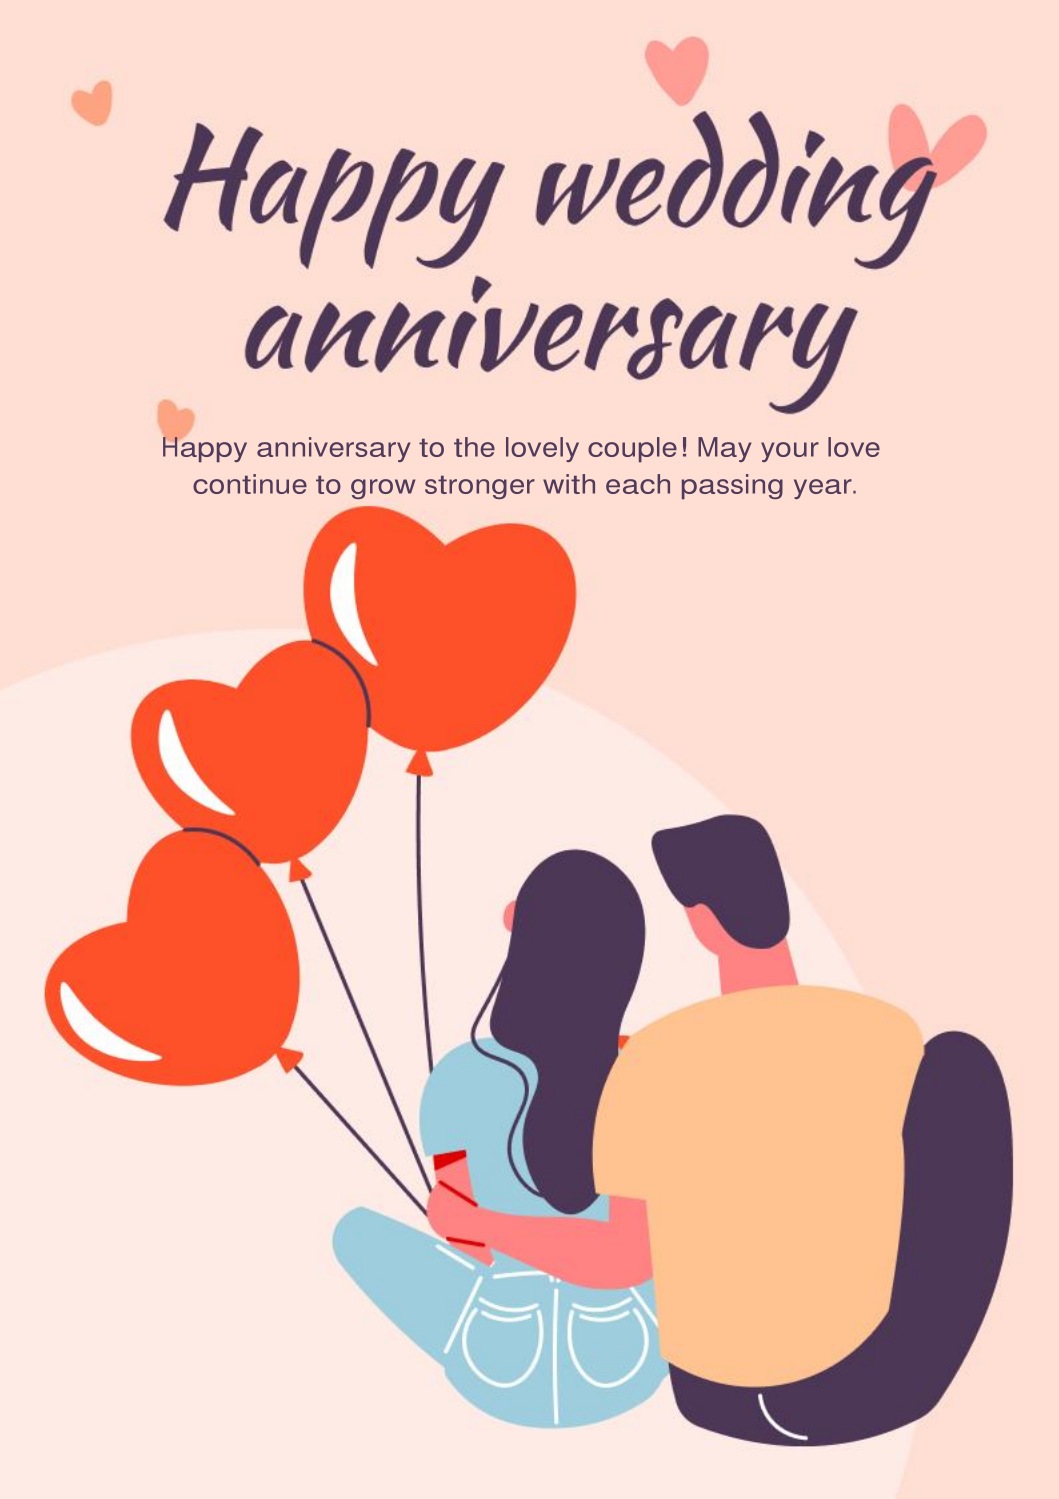 70 Anniversary Wishes for Husband: Quotes and Messages to Write